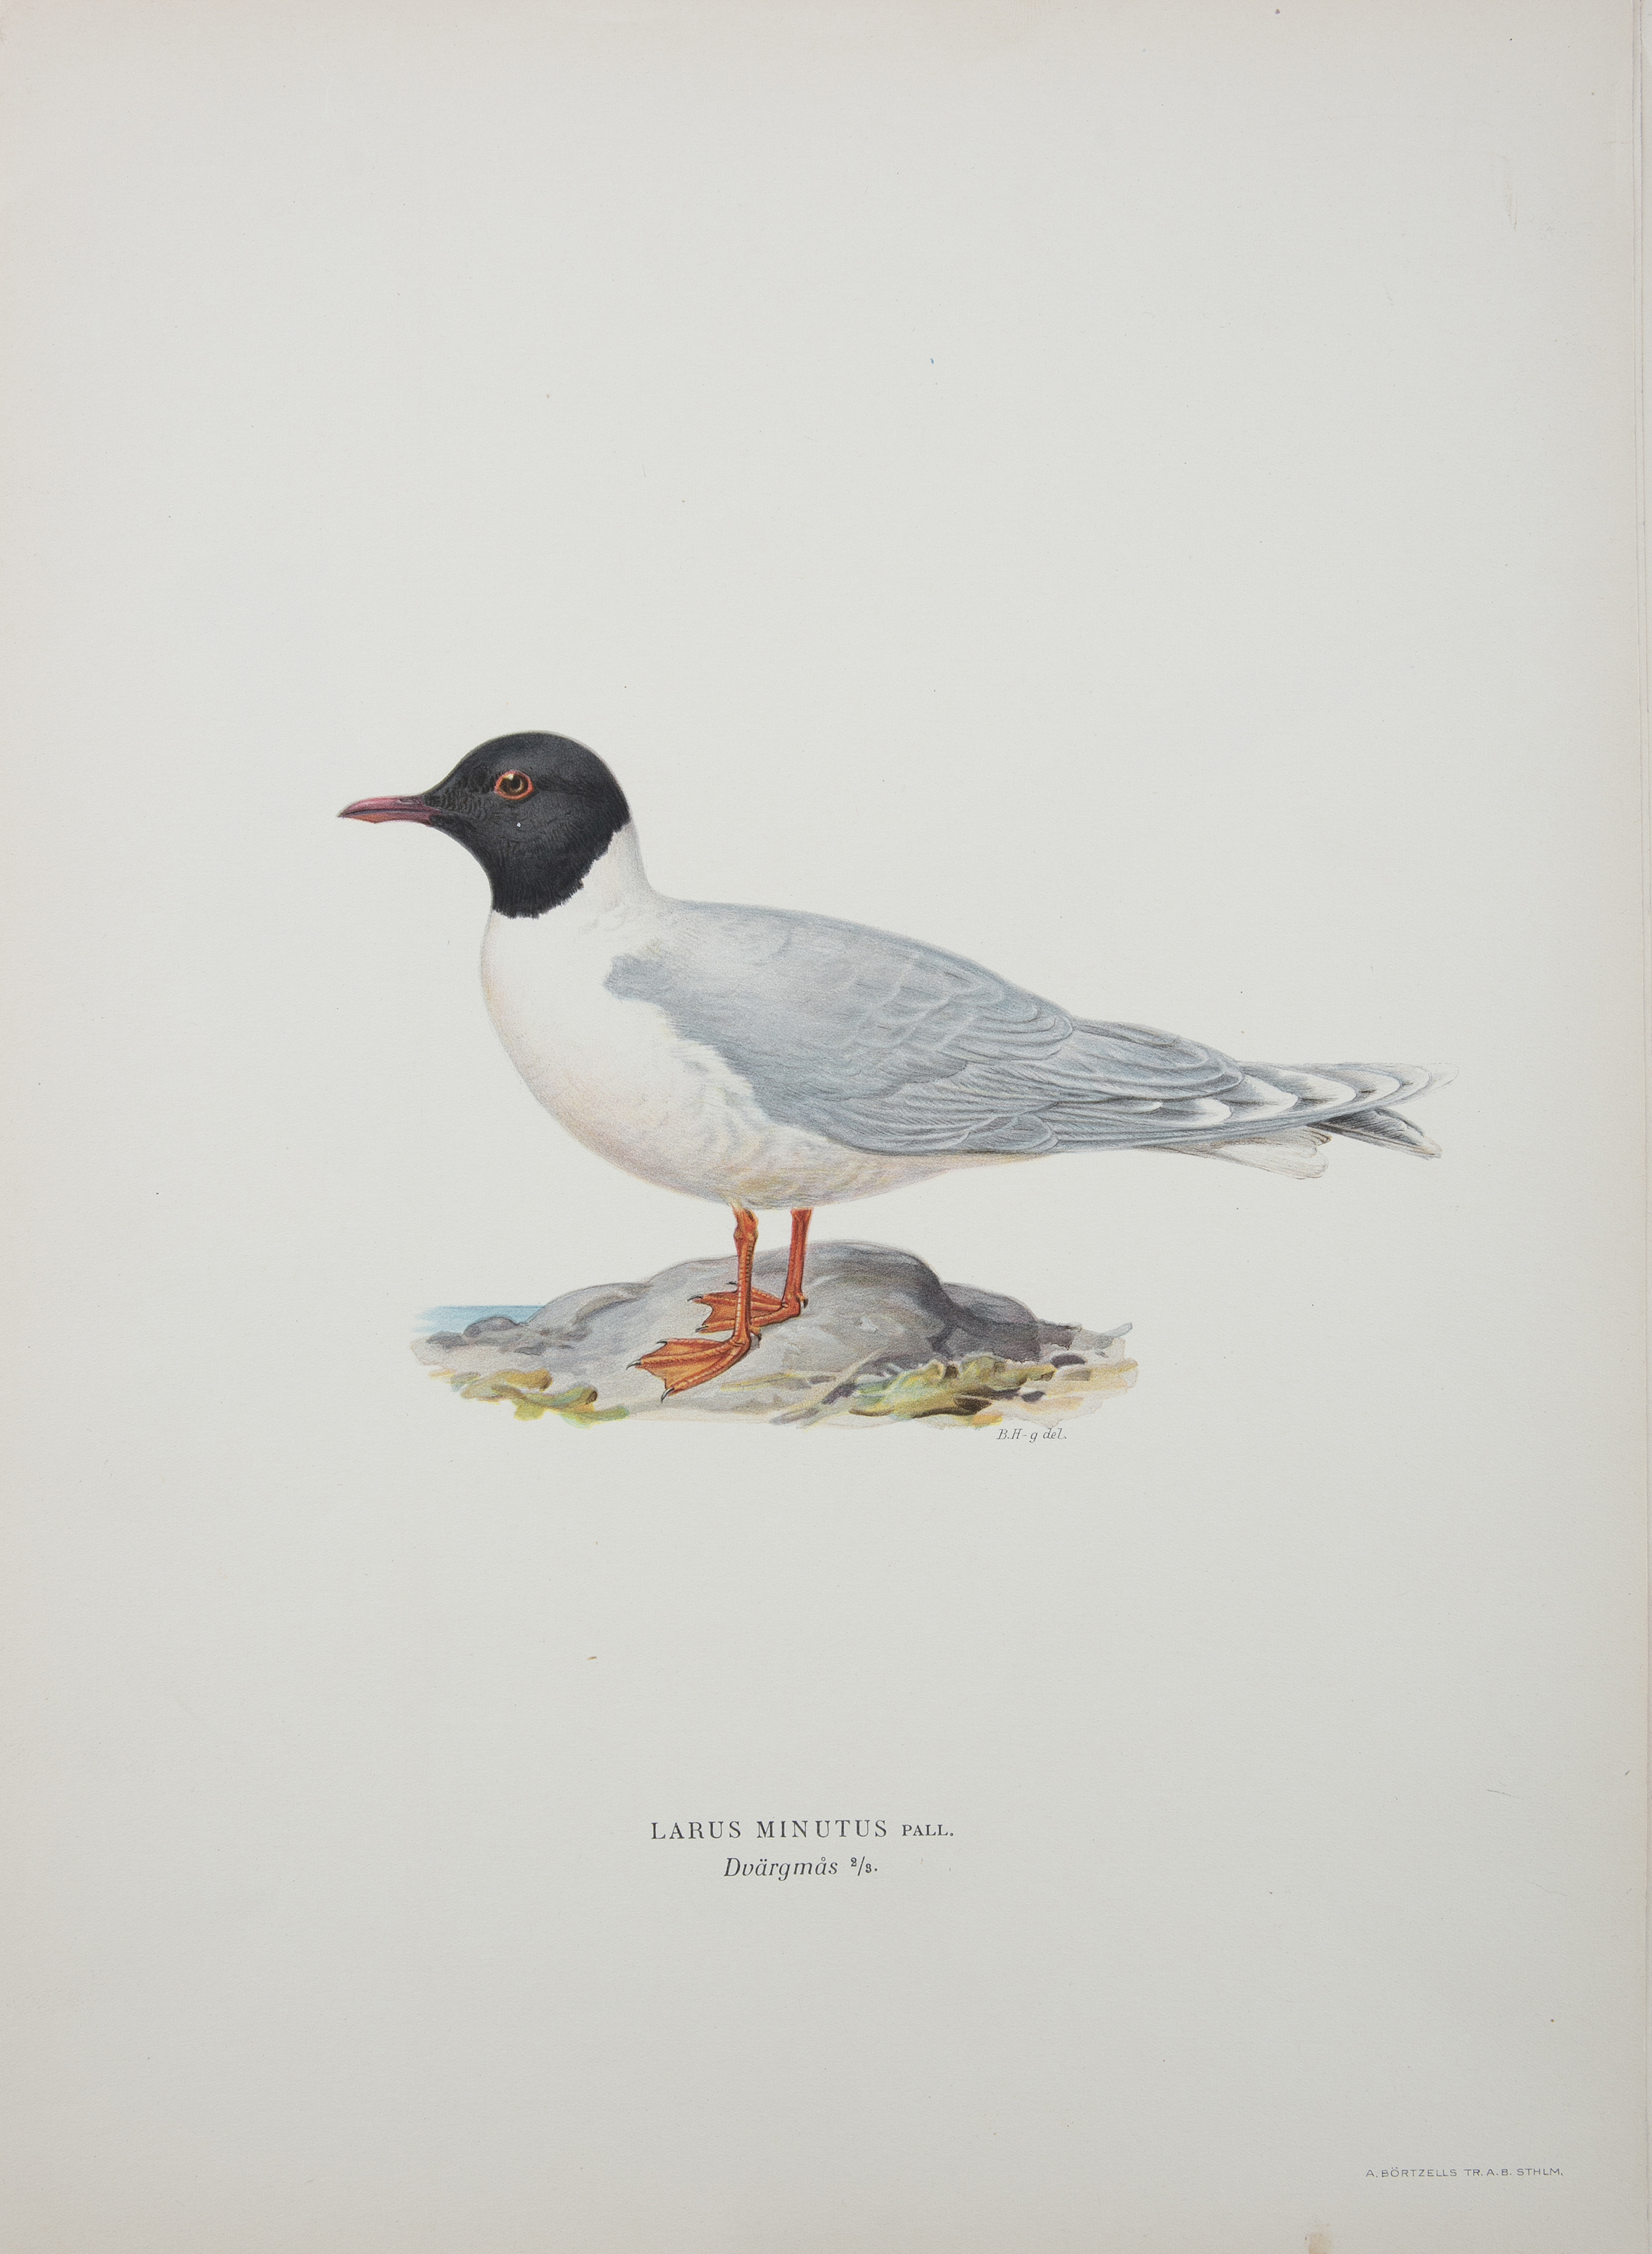 AFTER THE VON WRIGHT BROTHERS (SWEDISH-FINNISH 19TH CENTURY) A collection of 40 lithographs of birds - Image 7 of 7